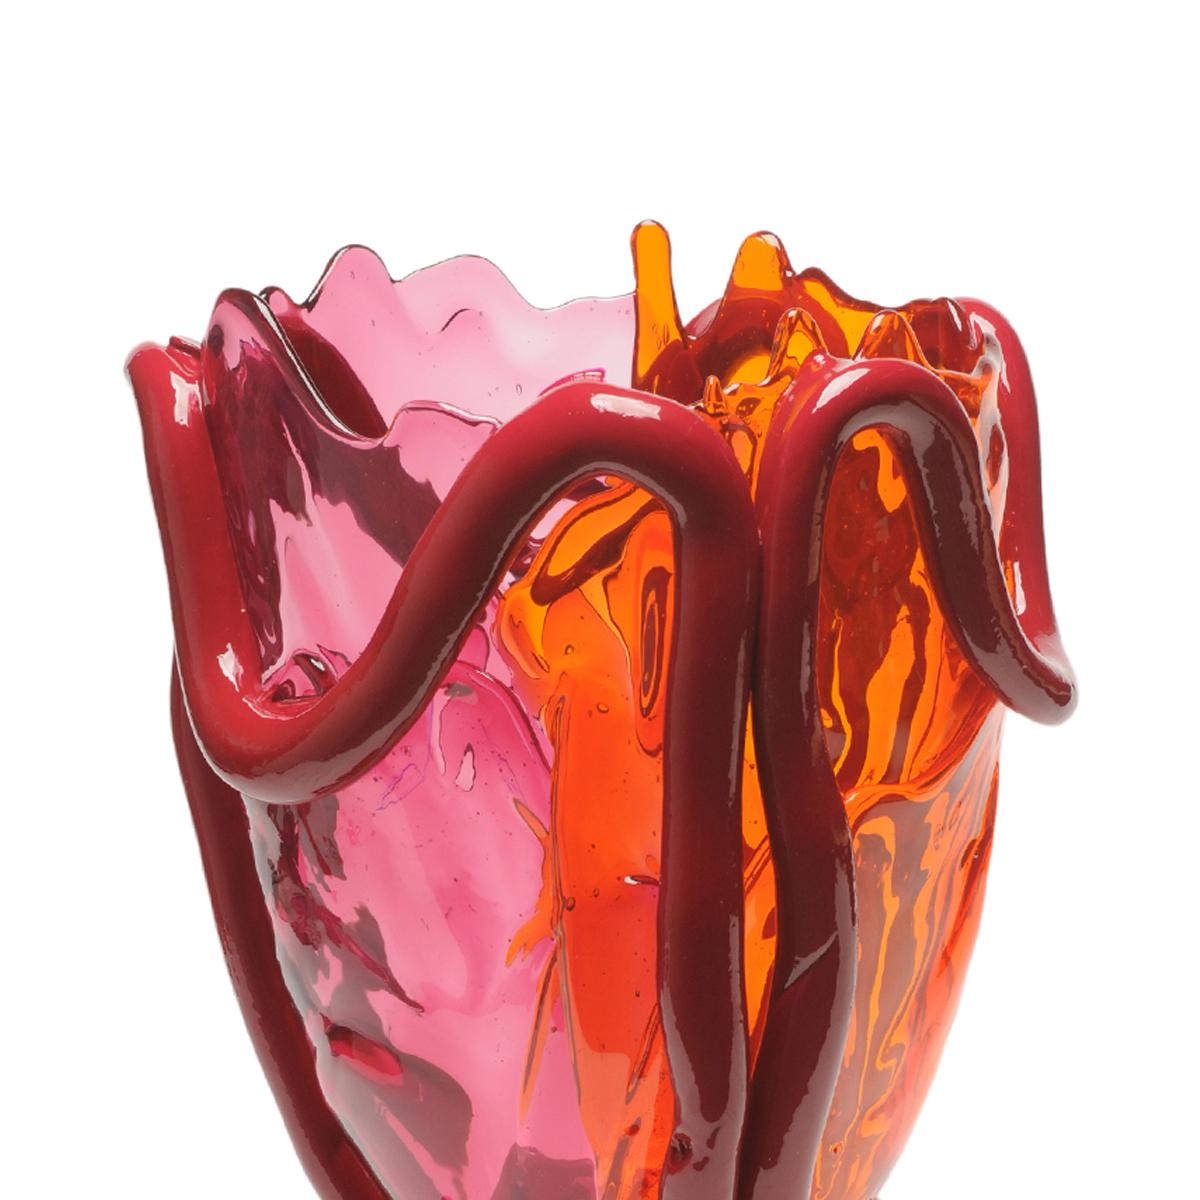 Indian summer vase - Clear fuchsia, orange and matt bordeaux.

Vase in soft resin designed by Gaetano Pesce in 1995 for Fish Design collection.

Measures: L - Ø 22cm x H 36cm

Other sizes available.
Vase in soft resin designed by Gaetano Pesce in